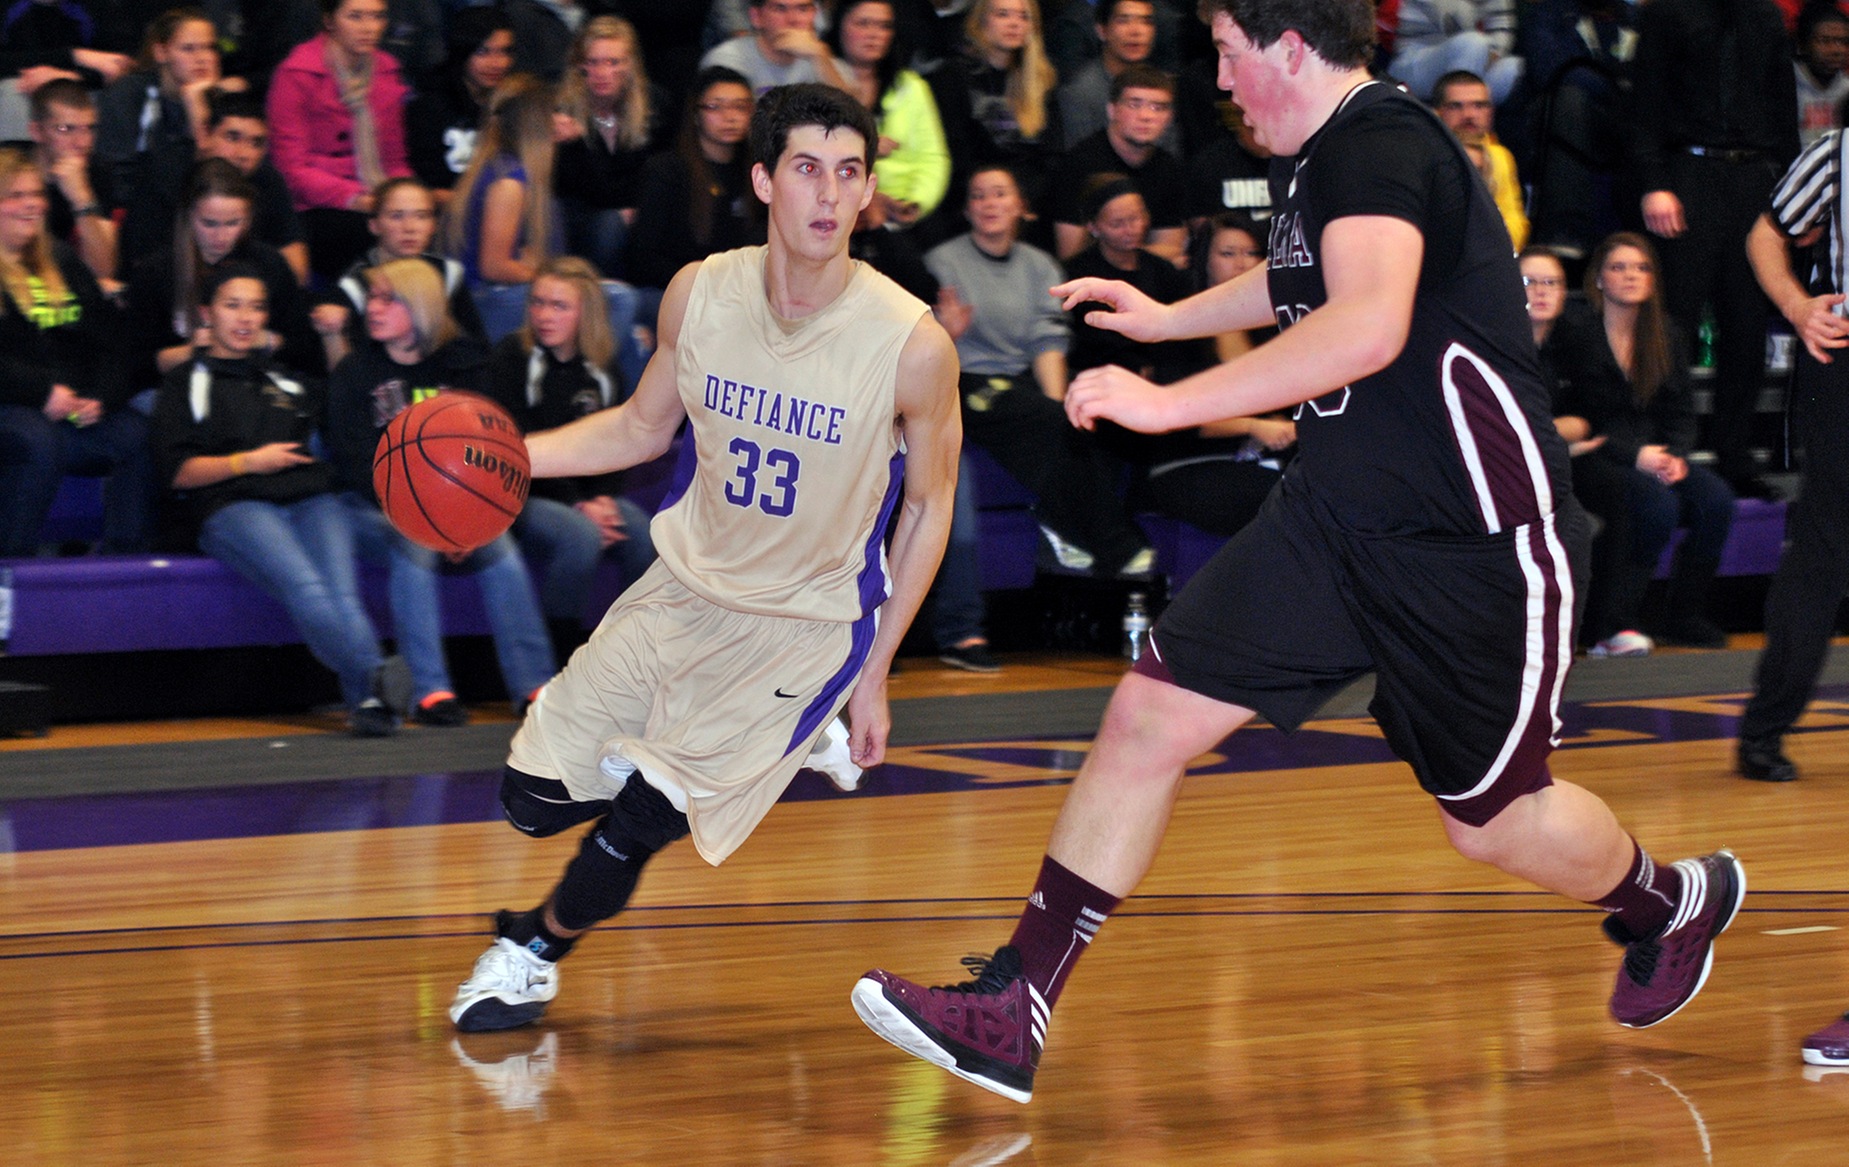 DC’s Wolfrum Nets Eighth HCAC Player-of-the-Week Honor